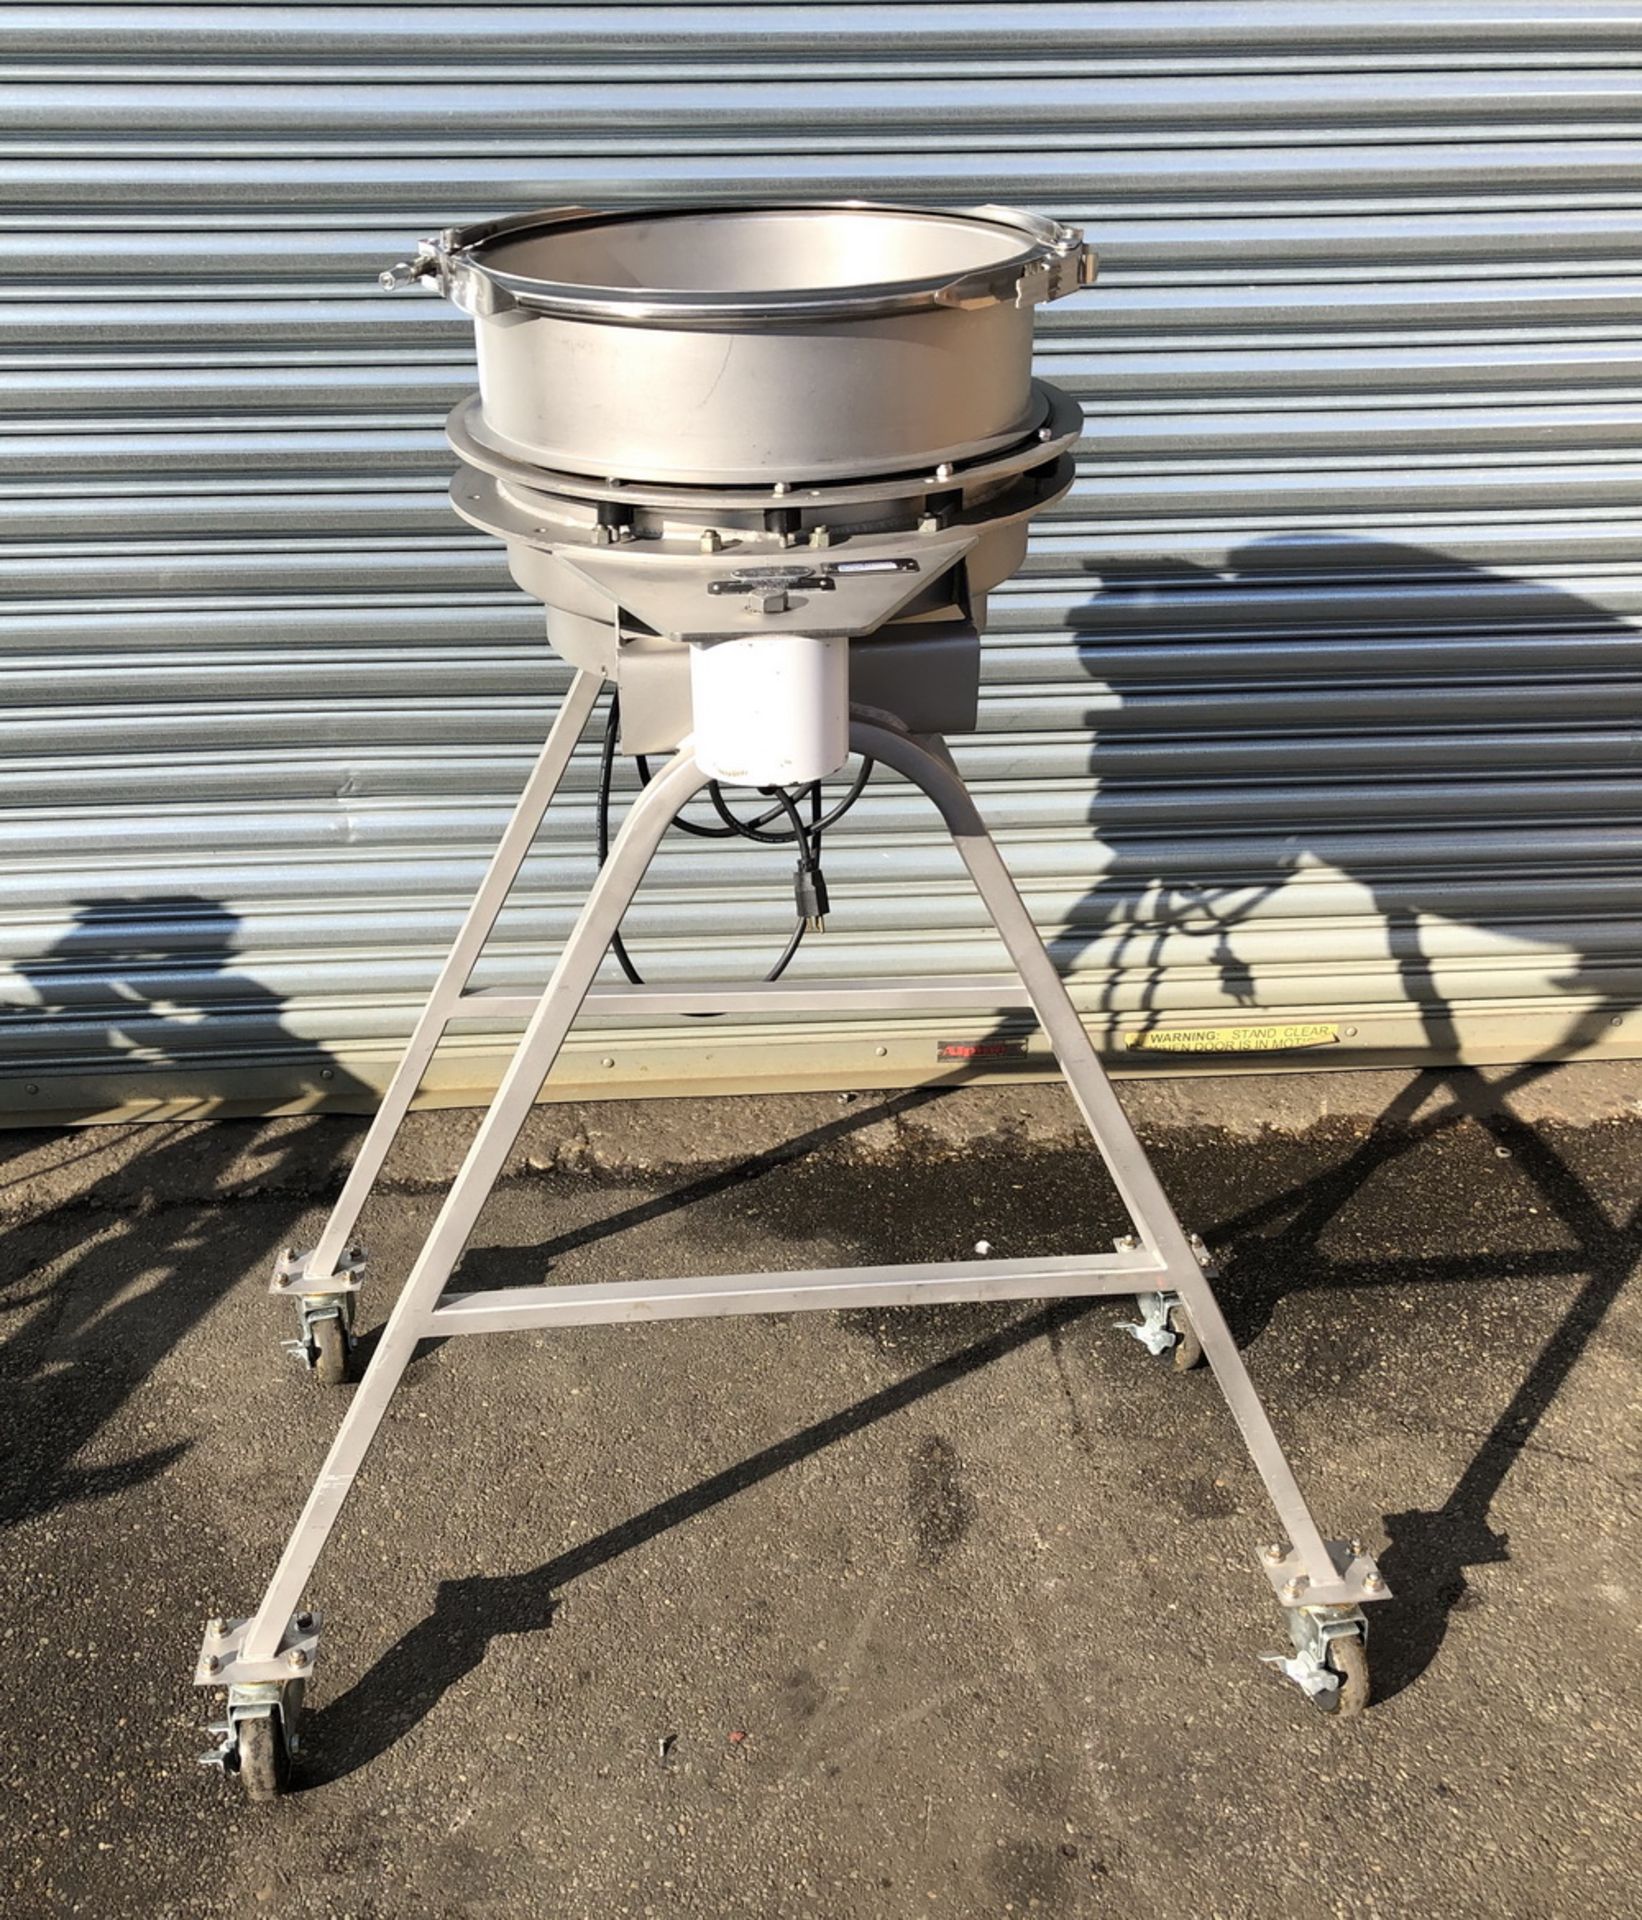 Midwestern Industries Stainless steel 16” Porta Sifter, S/N 0207-5772. Portable base, single deck - Image 6 of 9